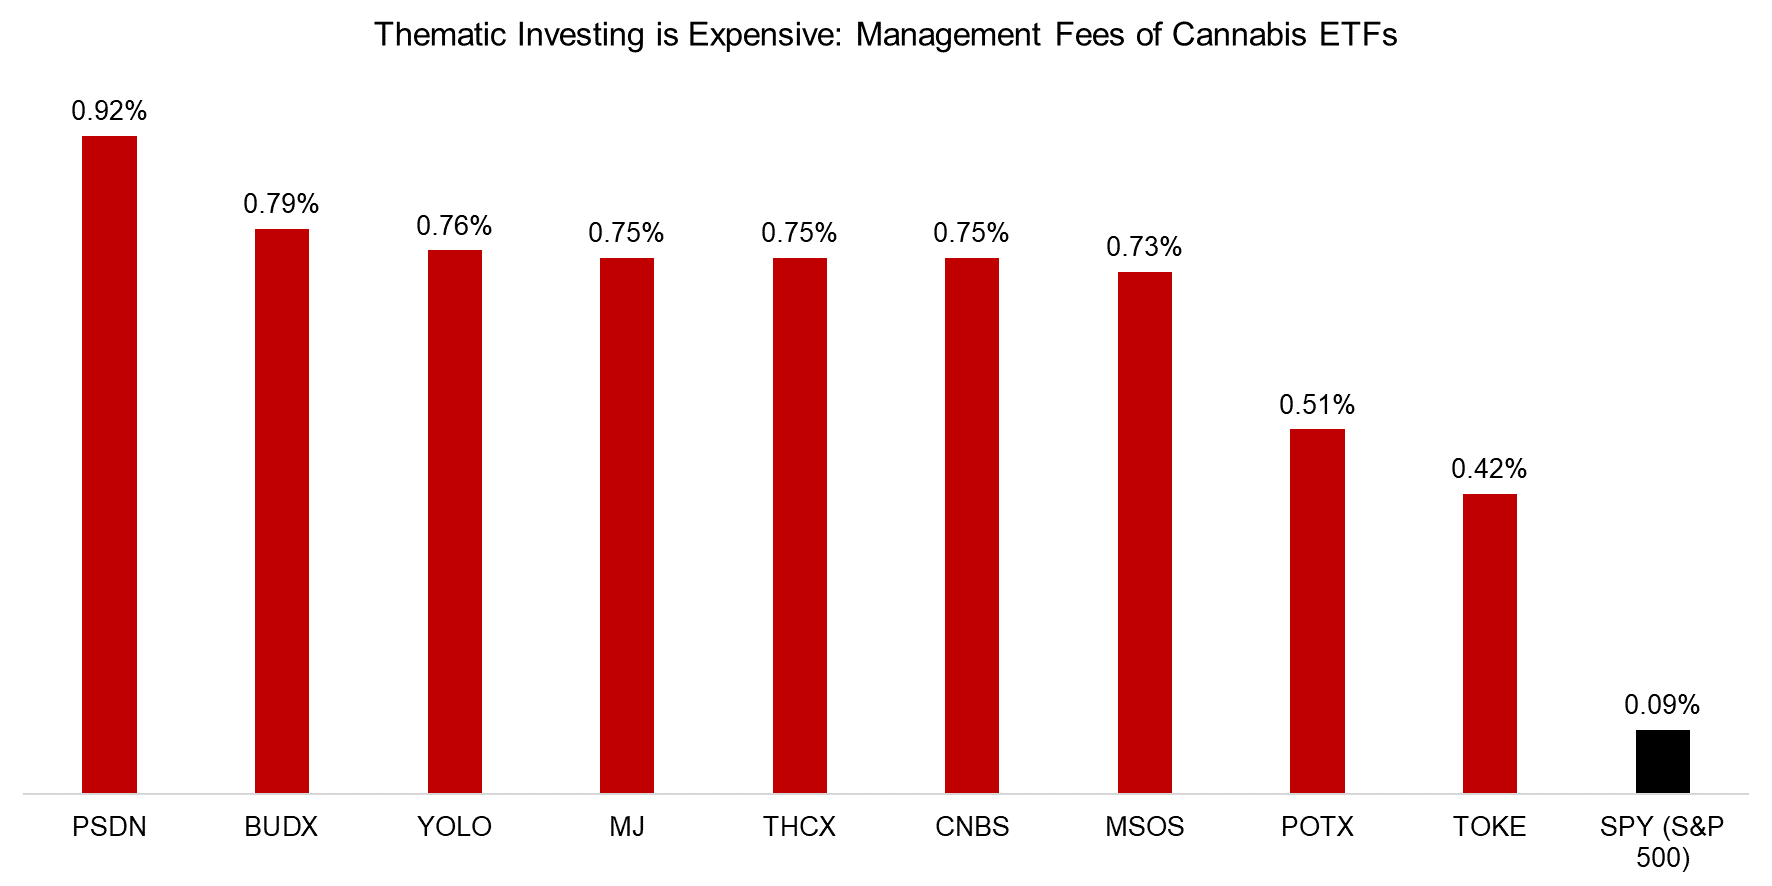 Thematic Investing is Expensive Management Fees of Cannabis ETFs